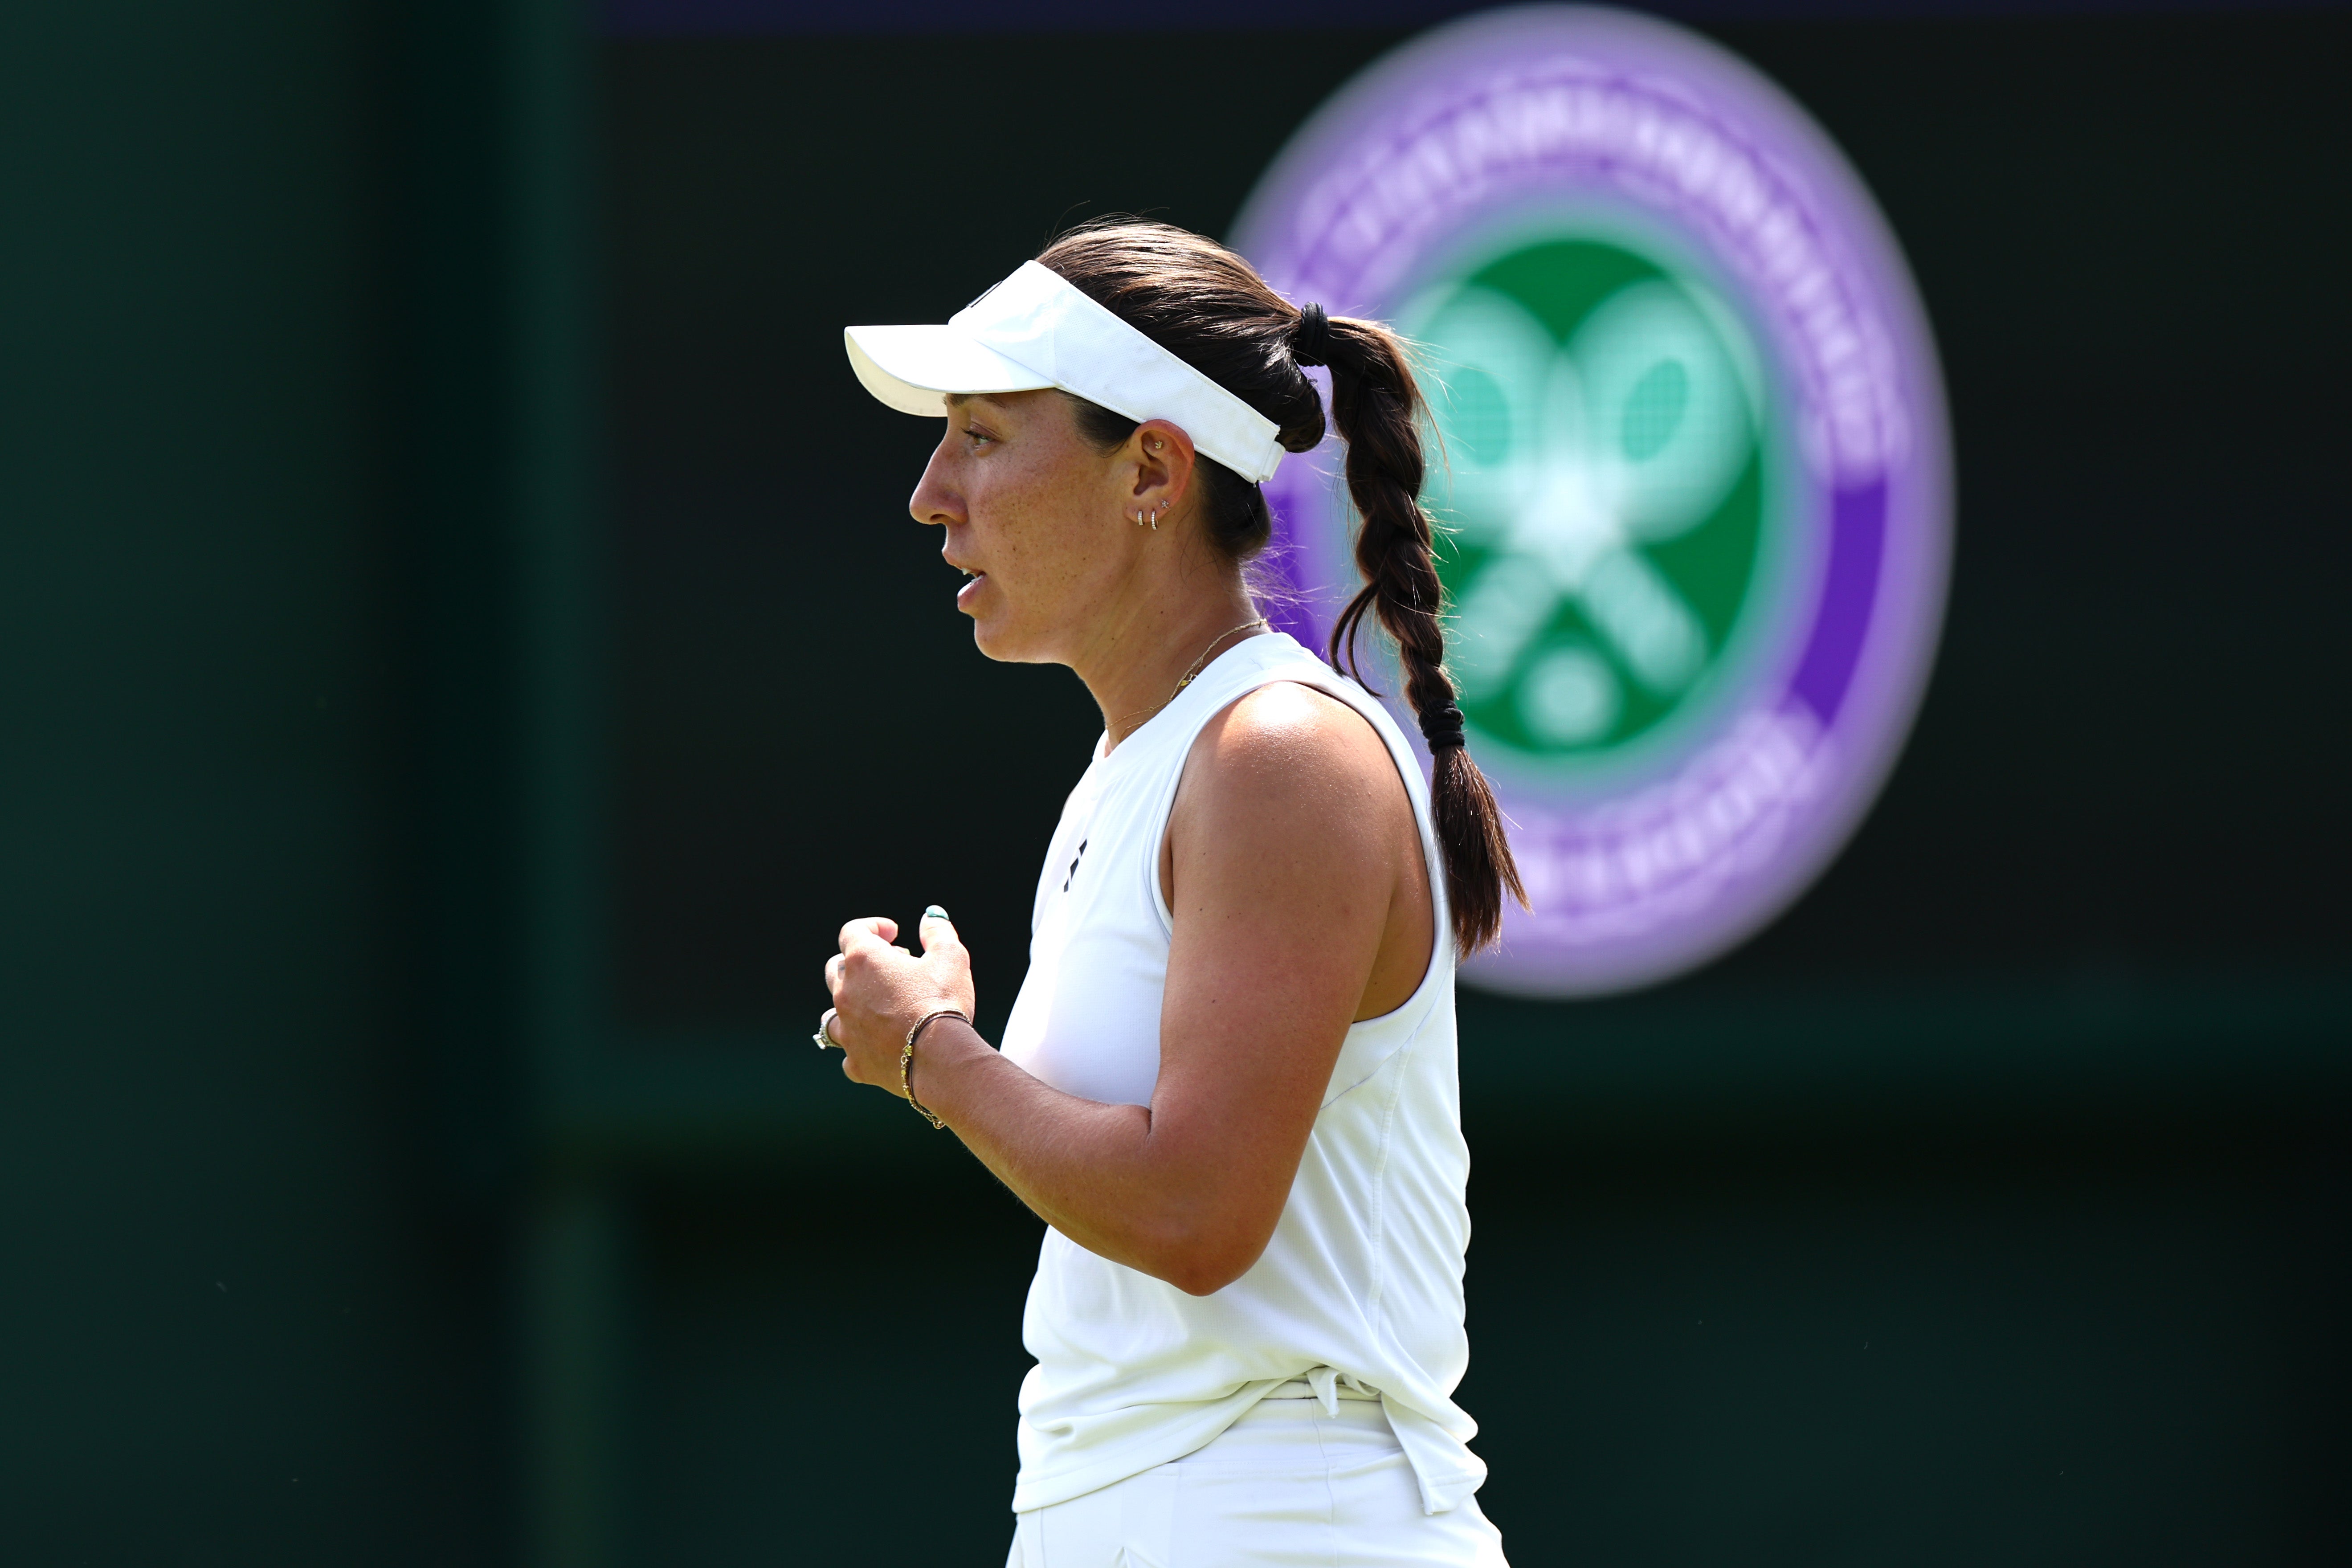 Jessica Pegula enters Wimbledon as the fifth seed in the women’s singles